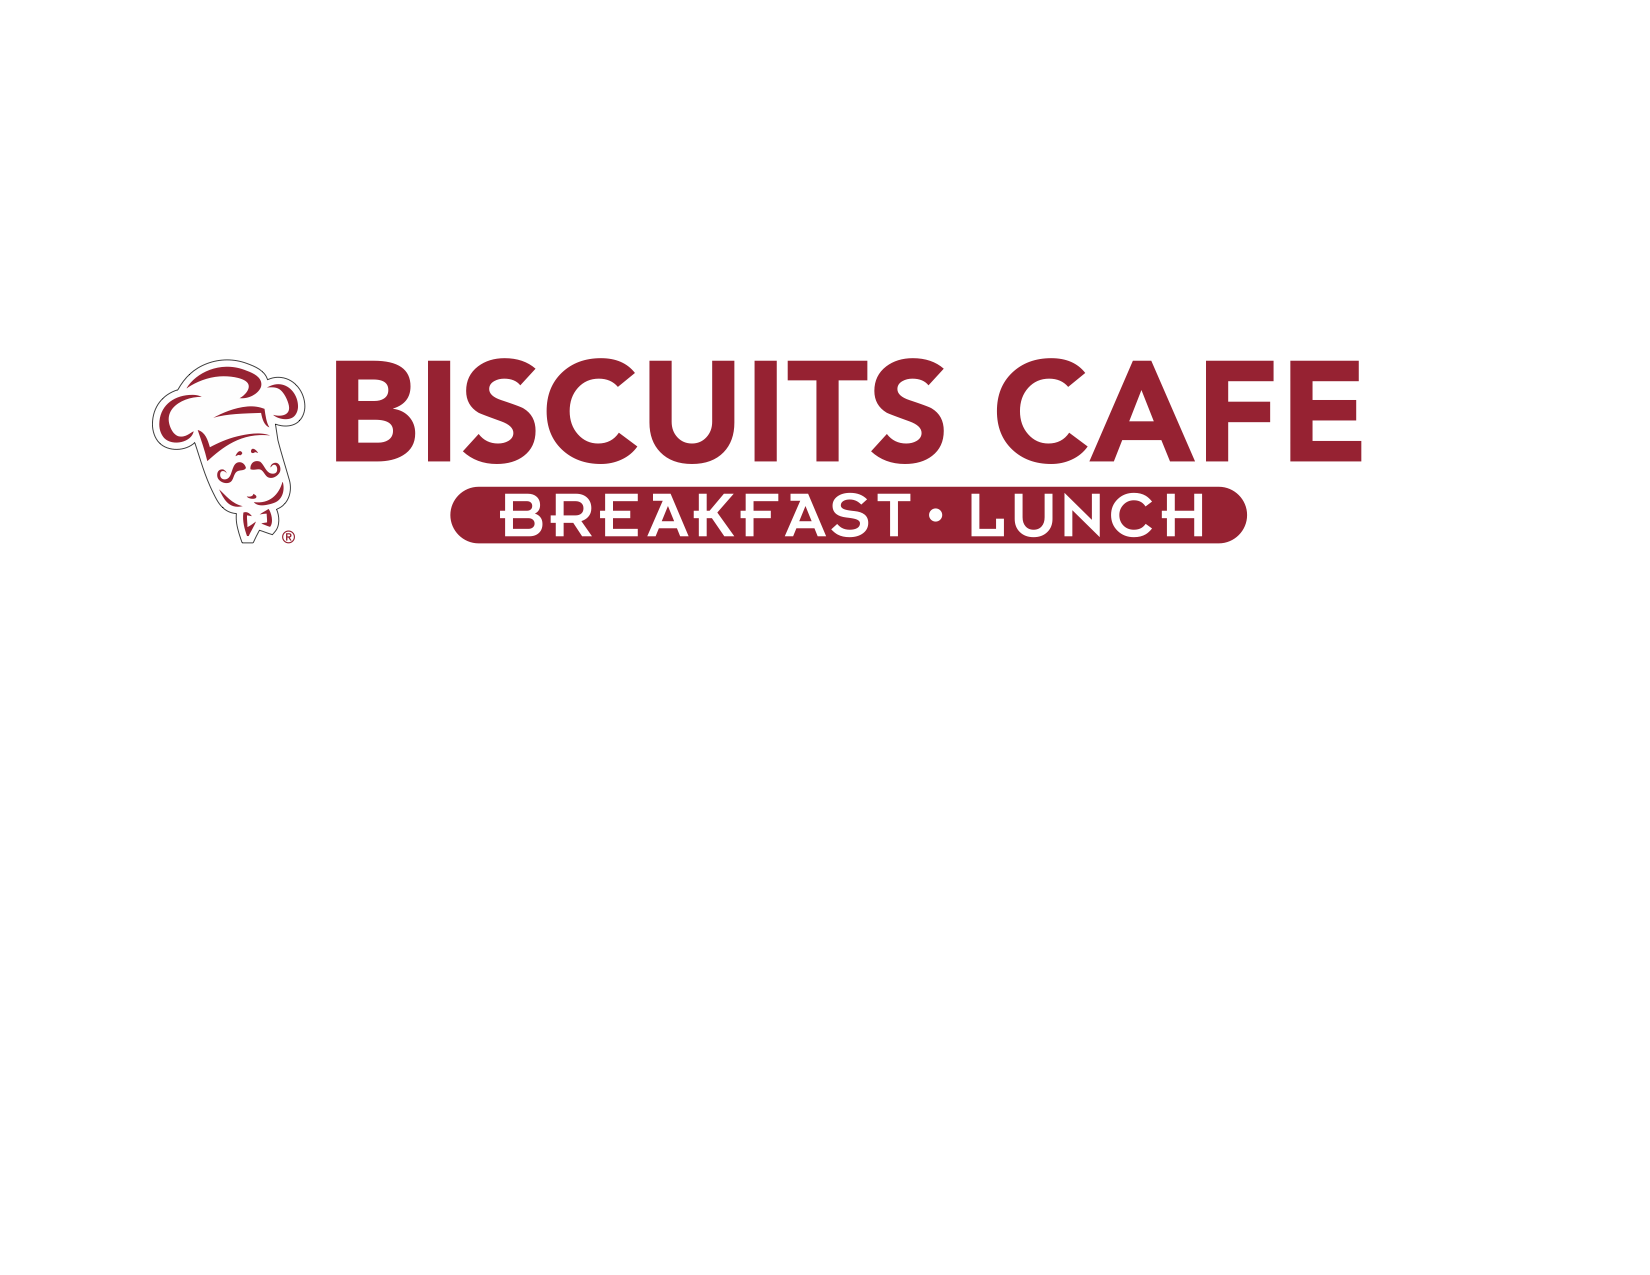 Biscuits Care